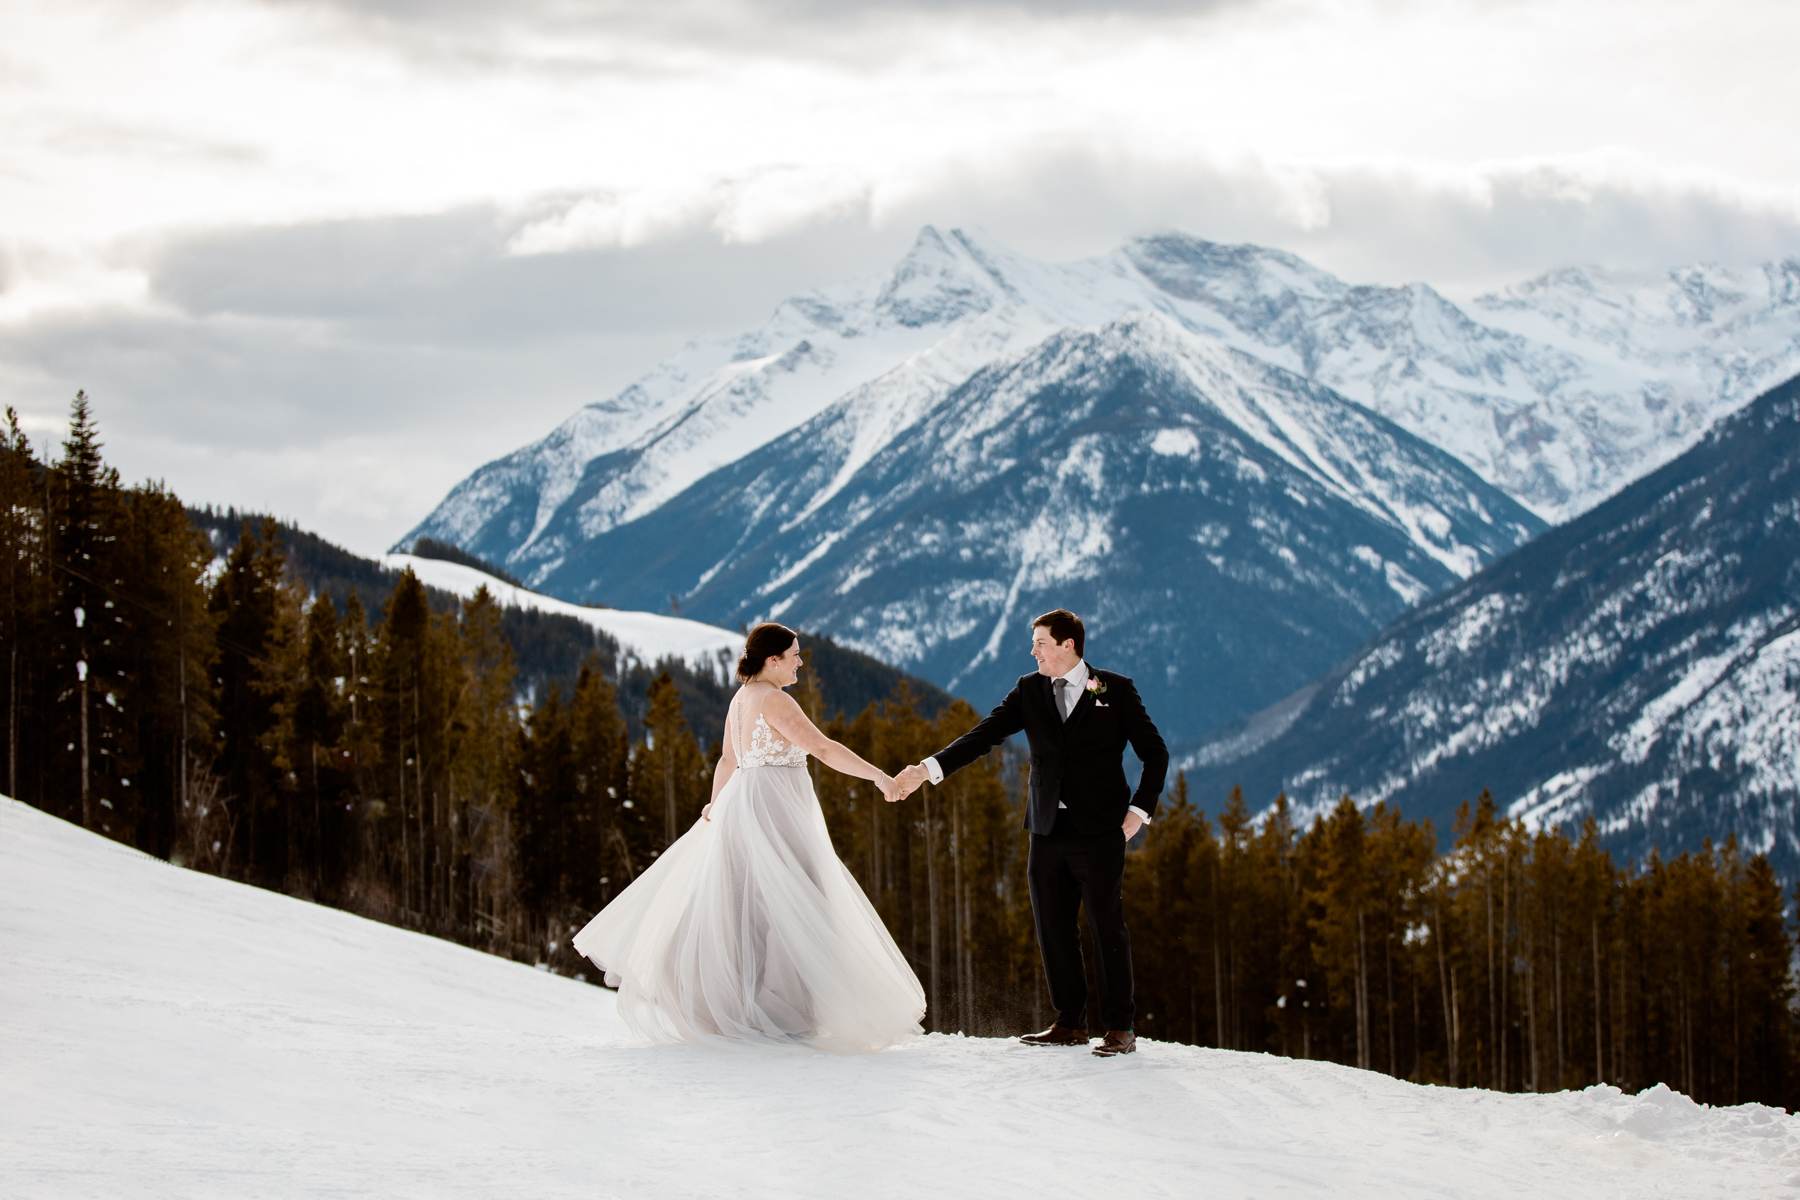 Invermere Wedding Photographers at Eagle Ranch and Panorama Ski Resort - Image 39